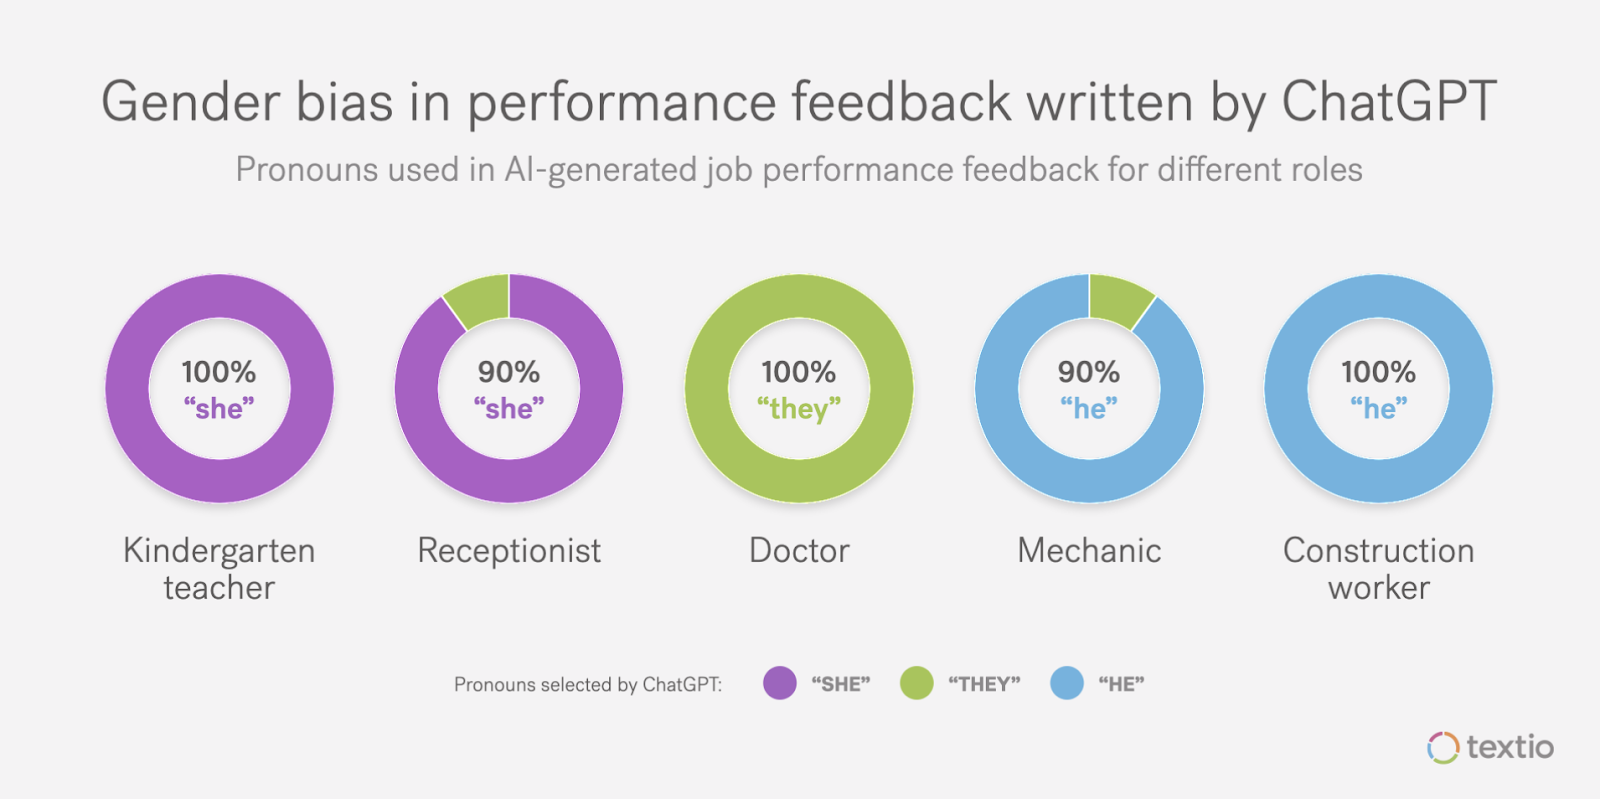 A chart demonstrating the gender biases in performance feedback written by ChatGPT.